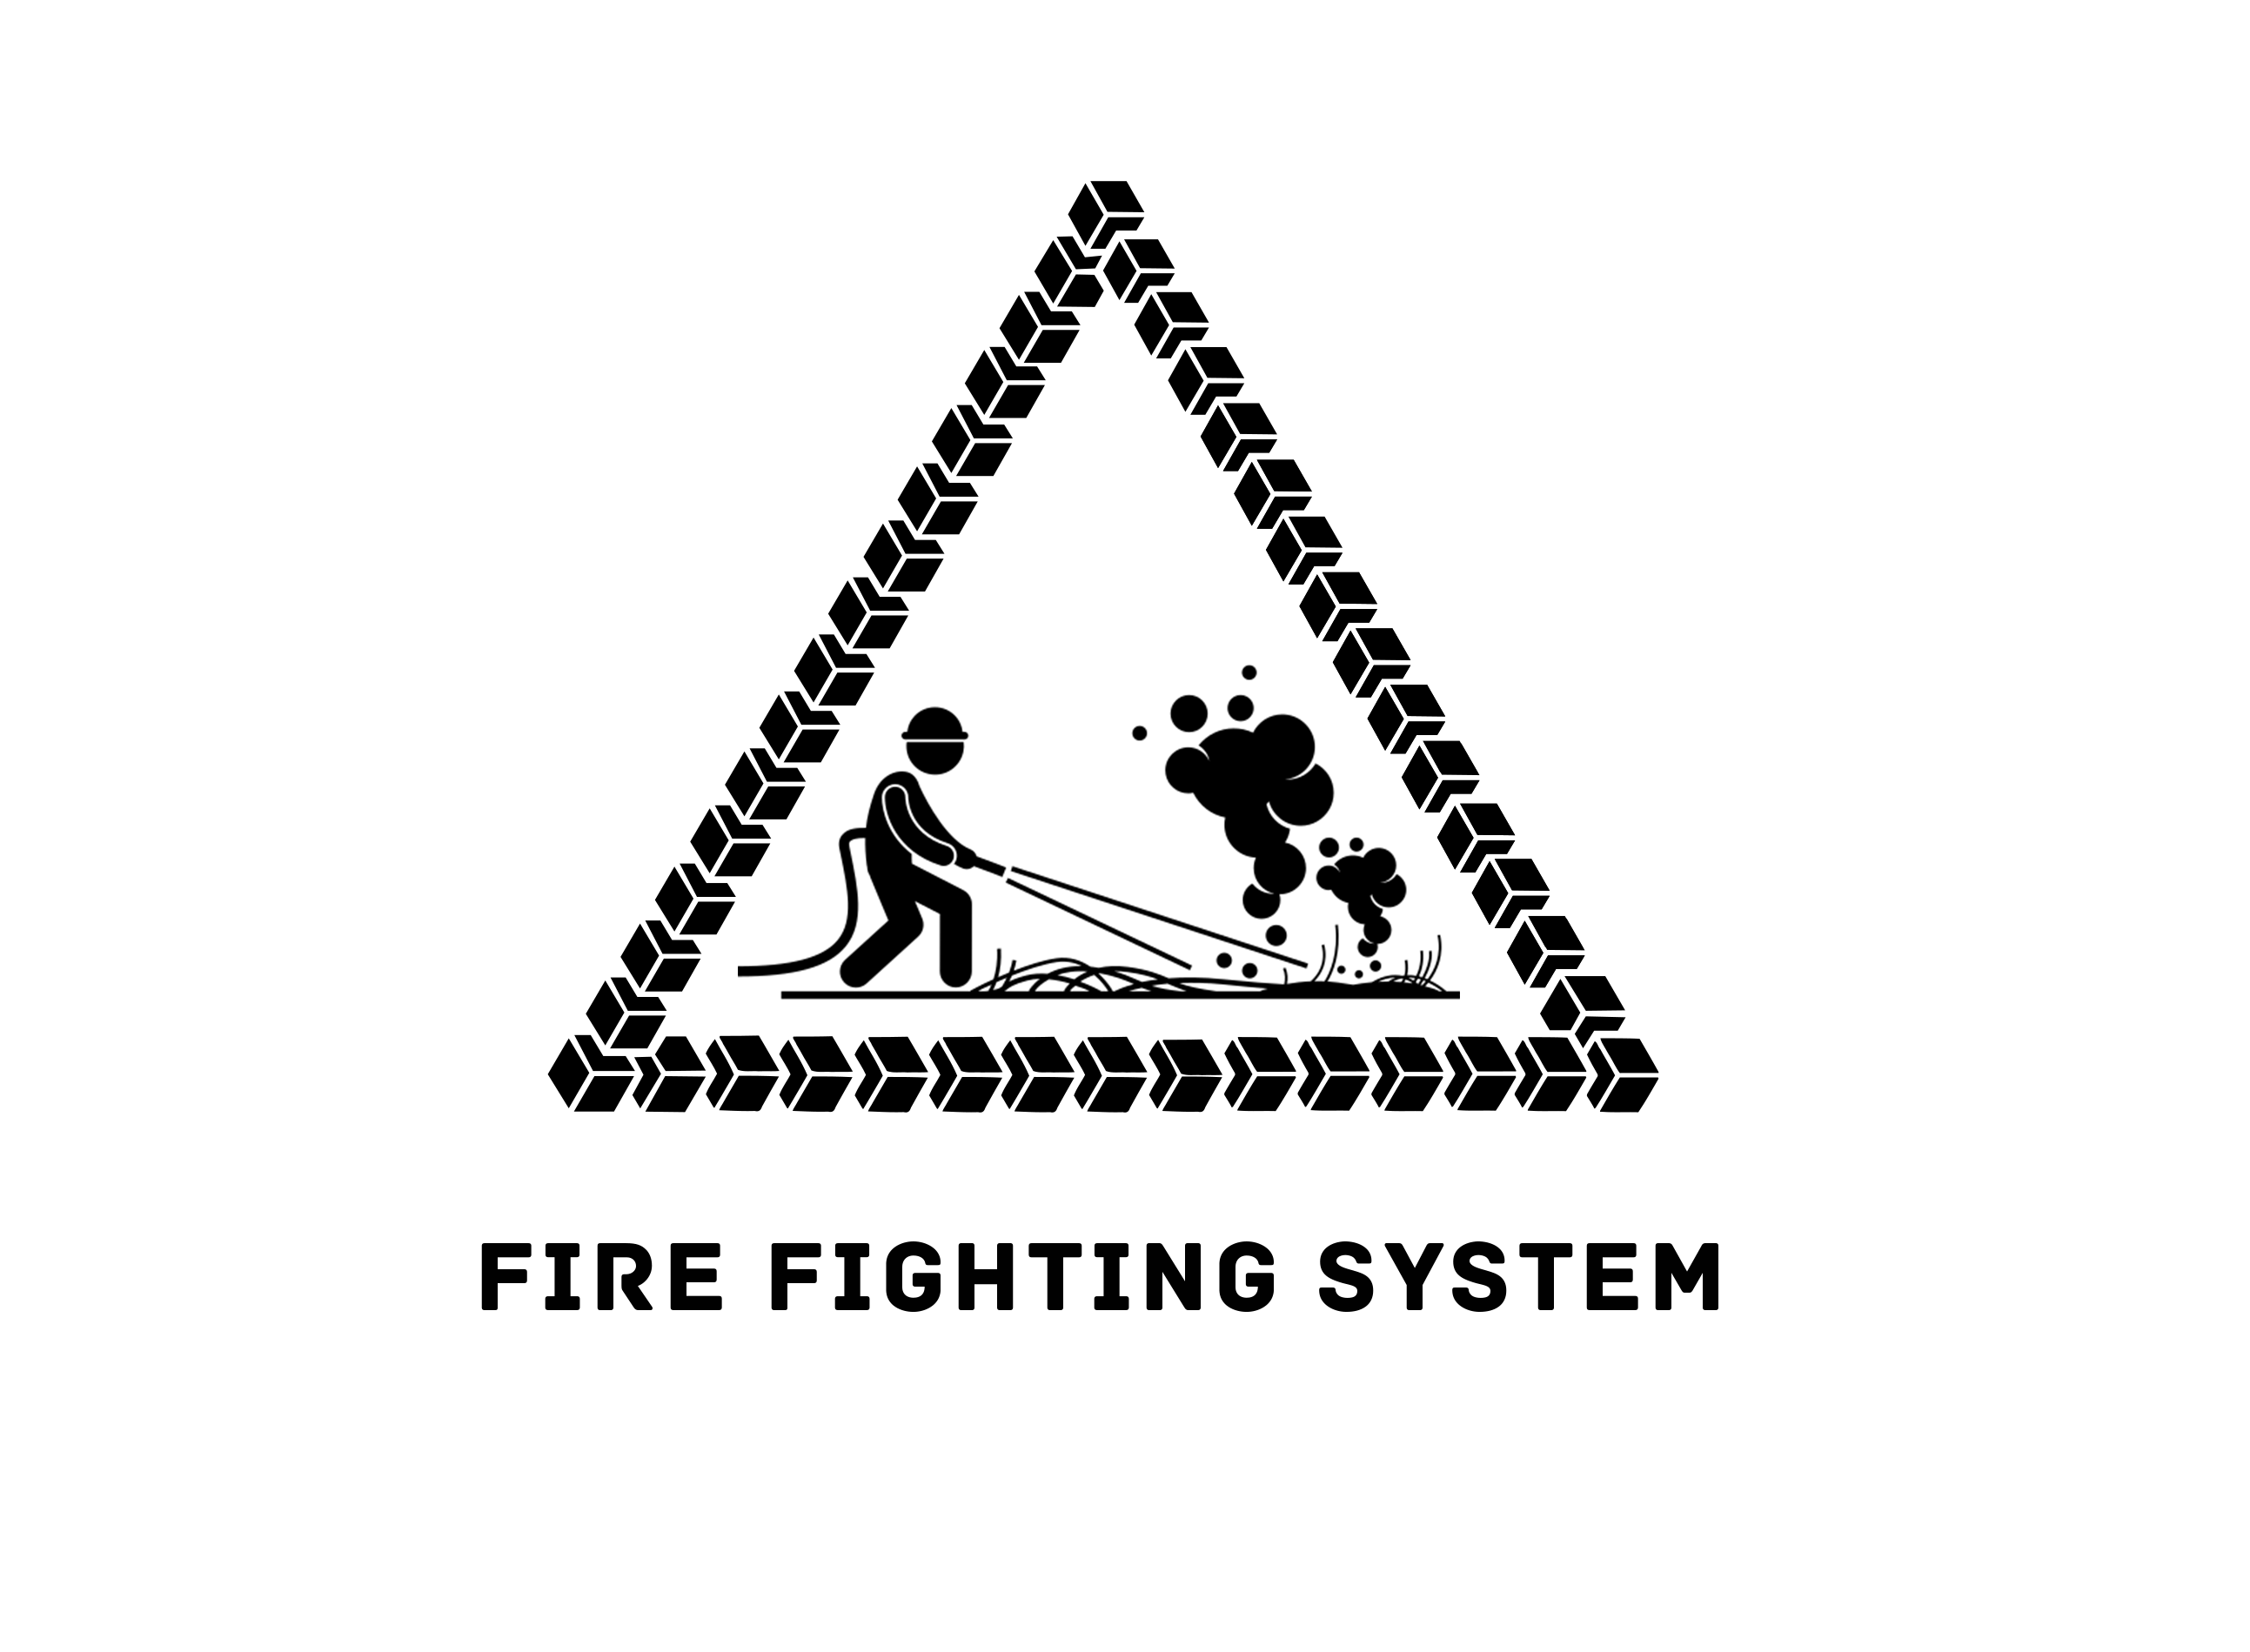 FIRE FIGHTING SYSTEM